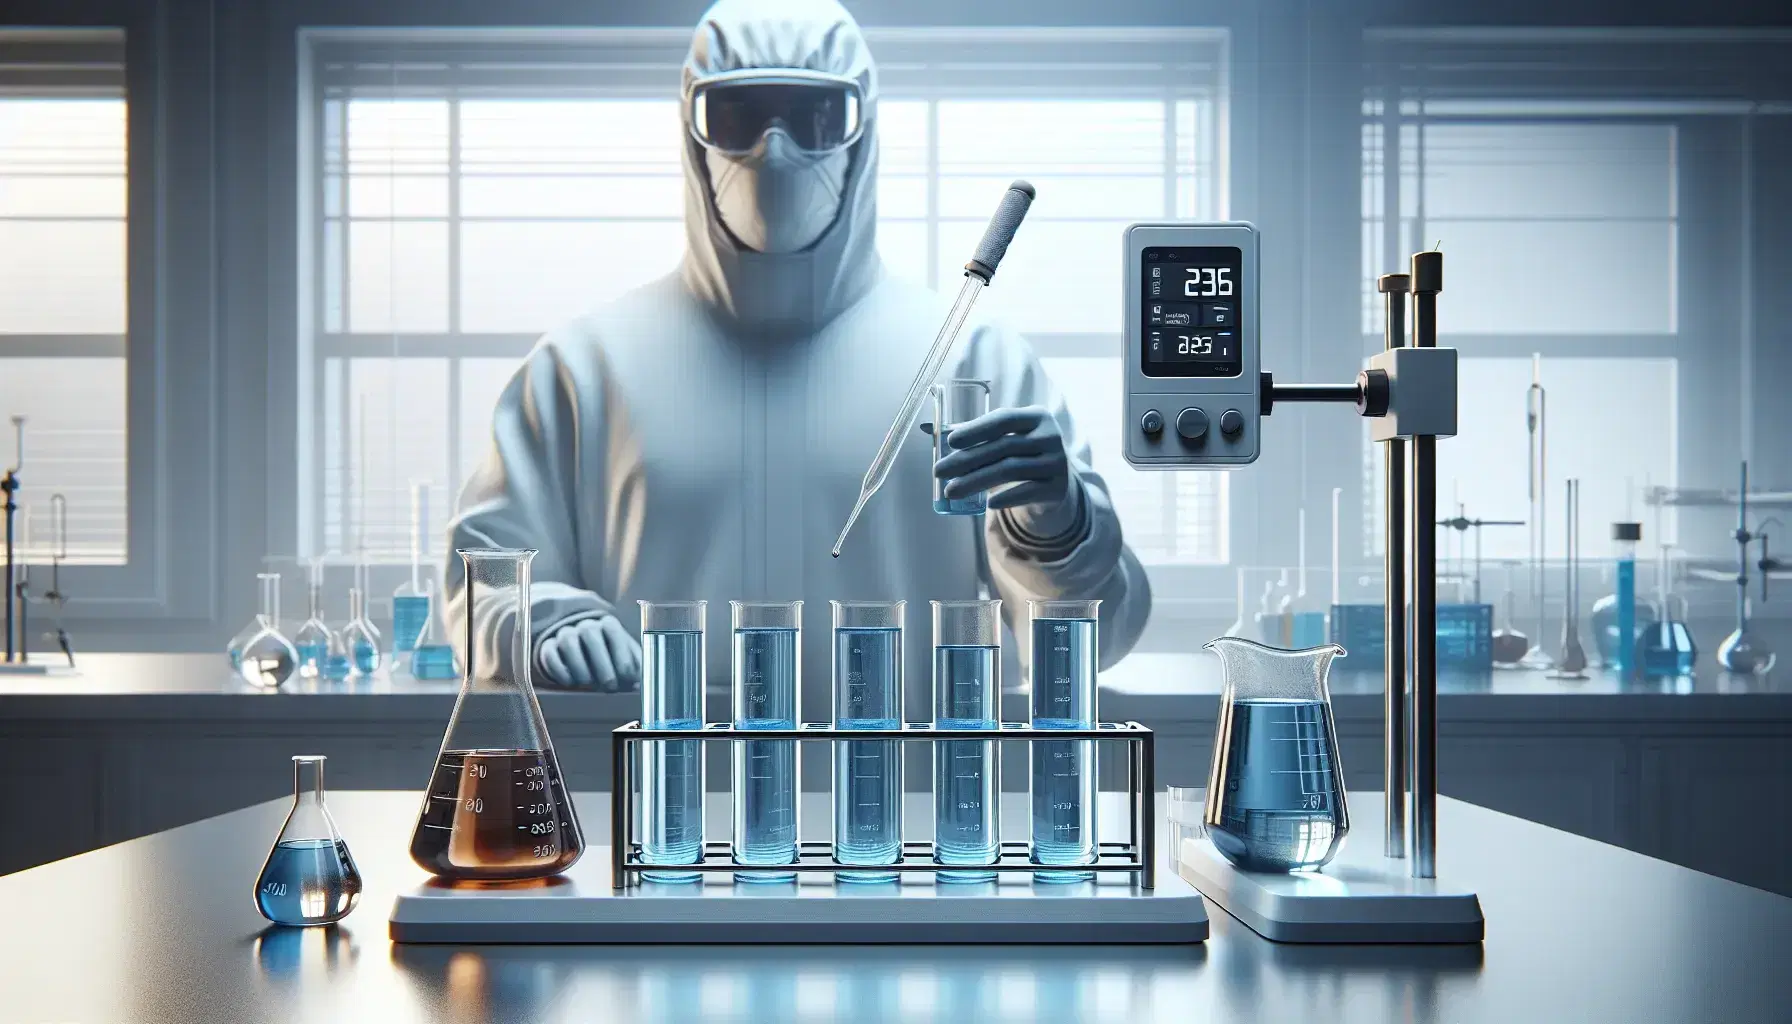 Laboratory with three glass beakers with blue liquid, digital thermometer, person in lab coat using dropper and rack with colored test tubes.